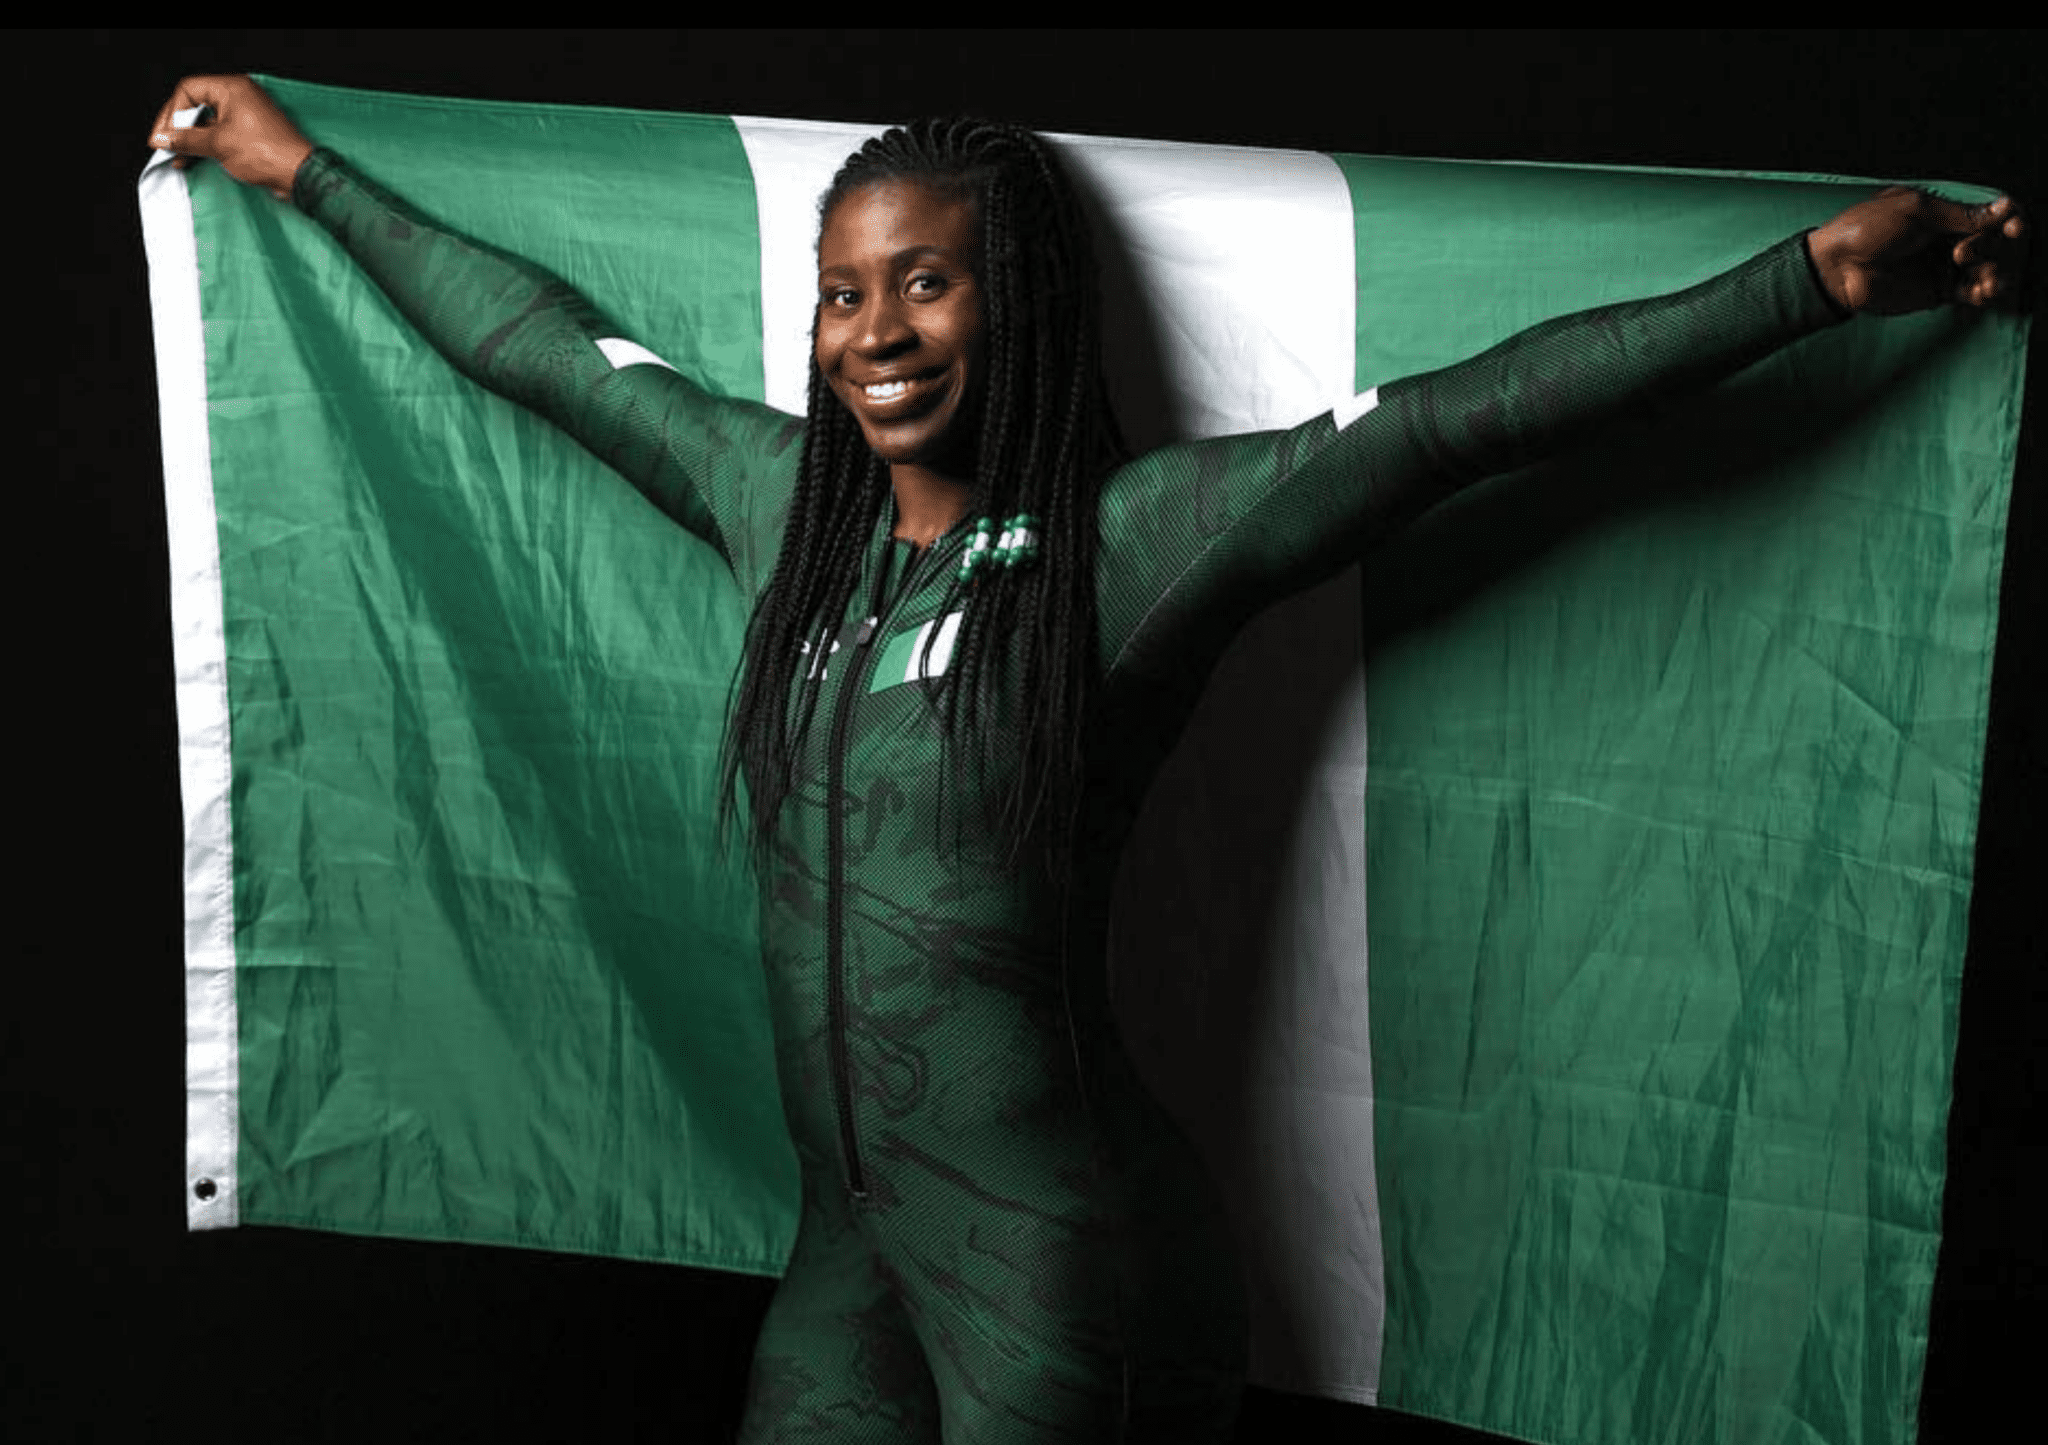 Nigeria’s Simidele will be the first black female Skeleton athlete at the Winter Olympics